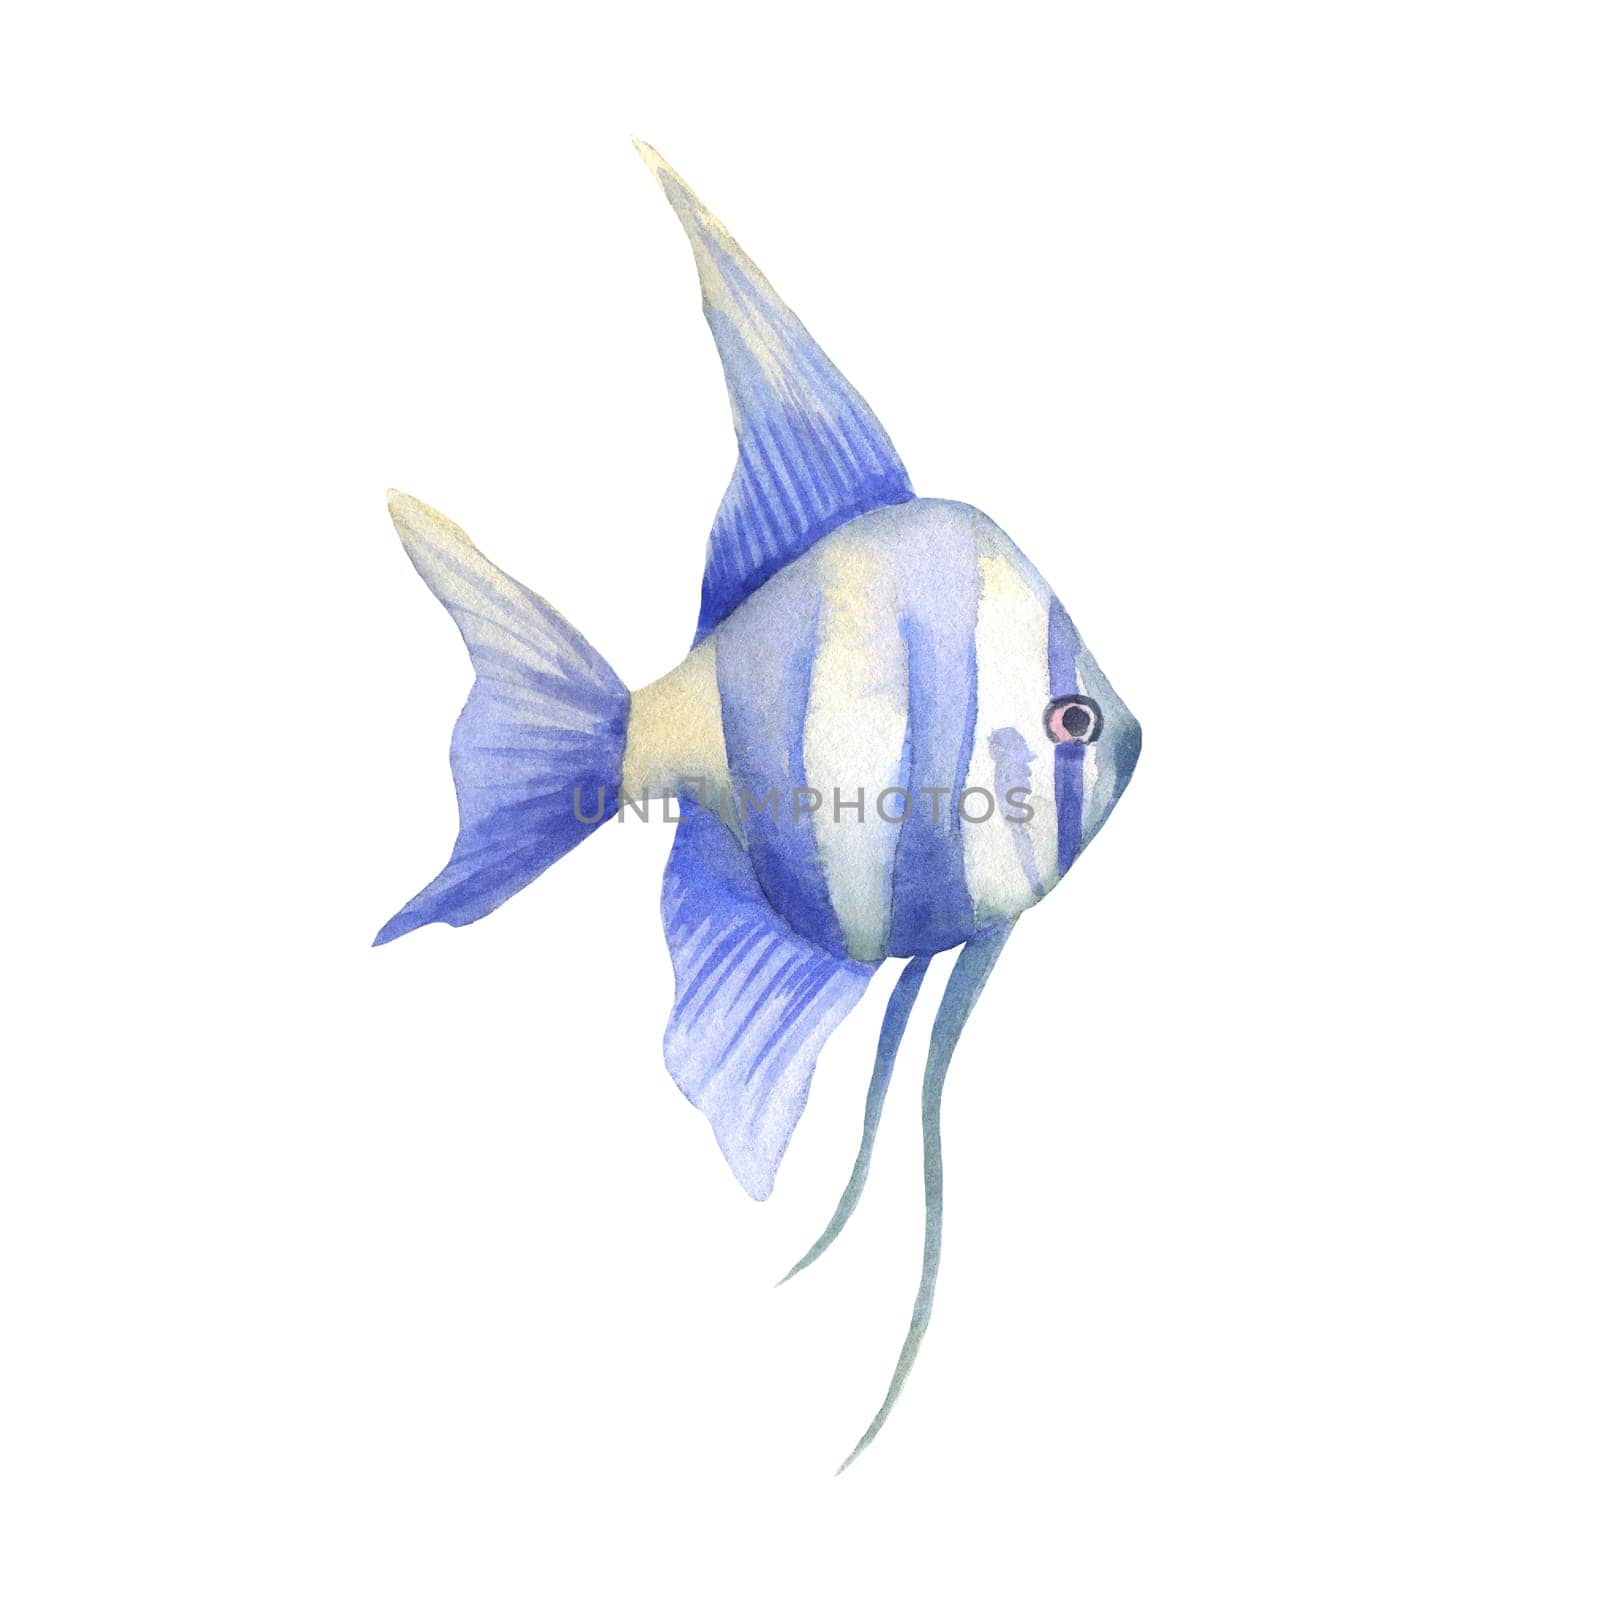 Watercolor blue fish isolated on white.